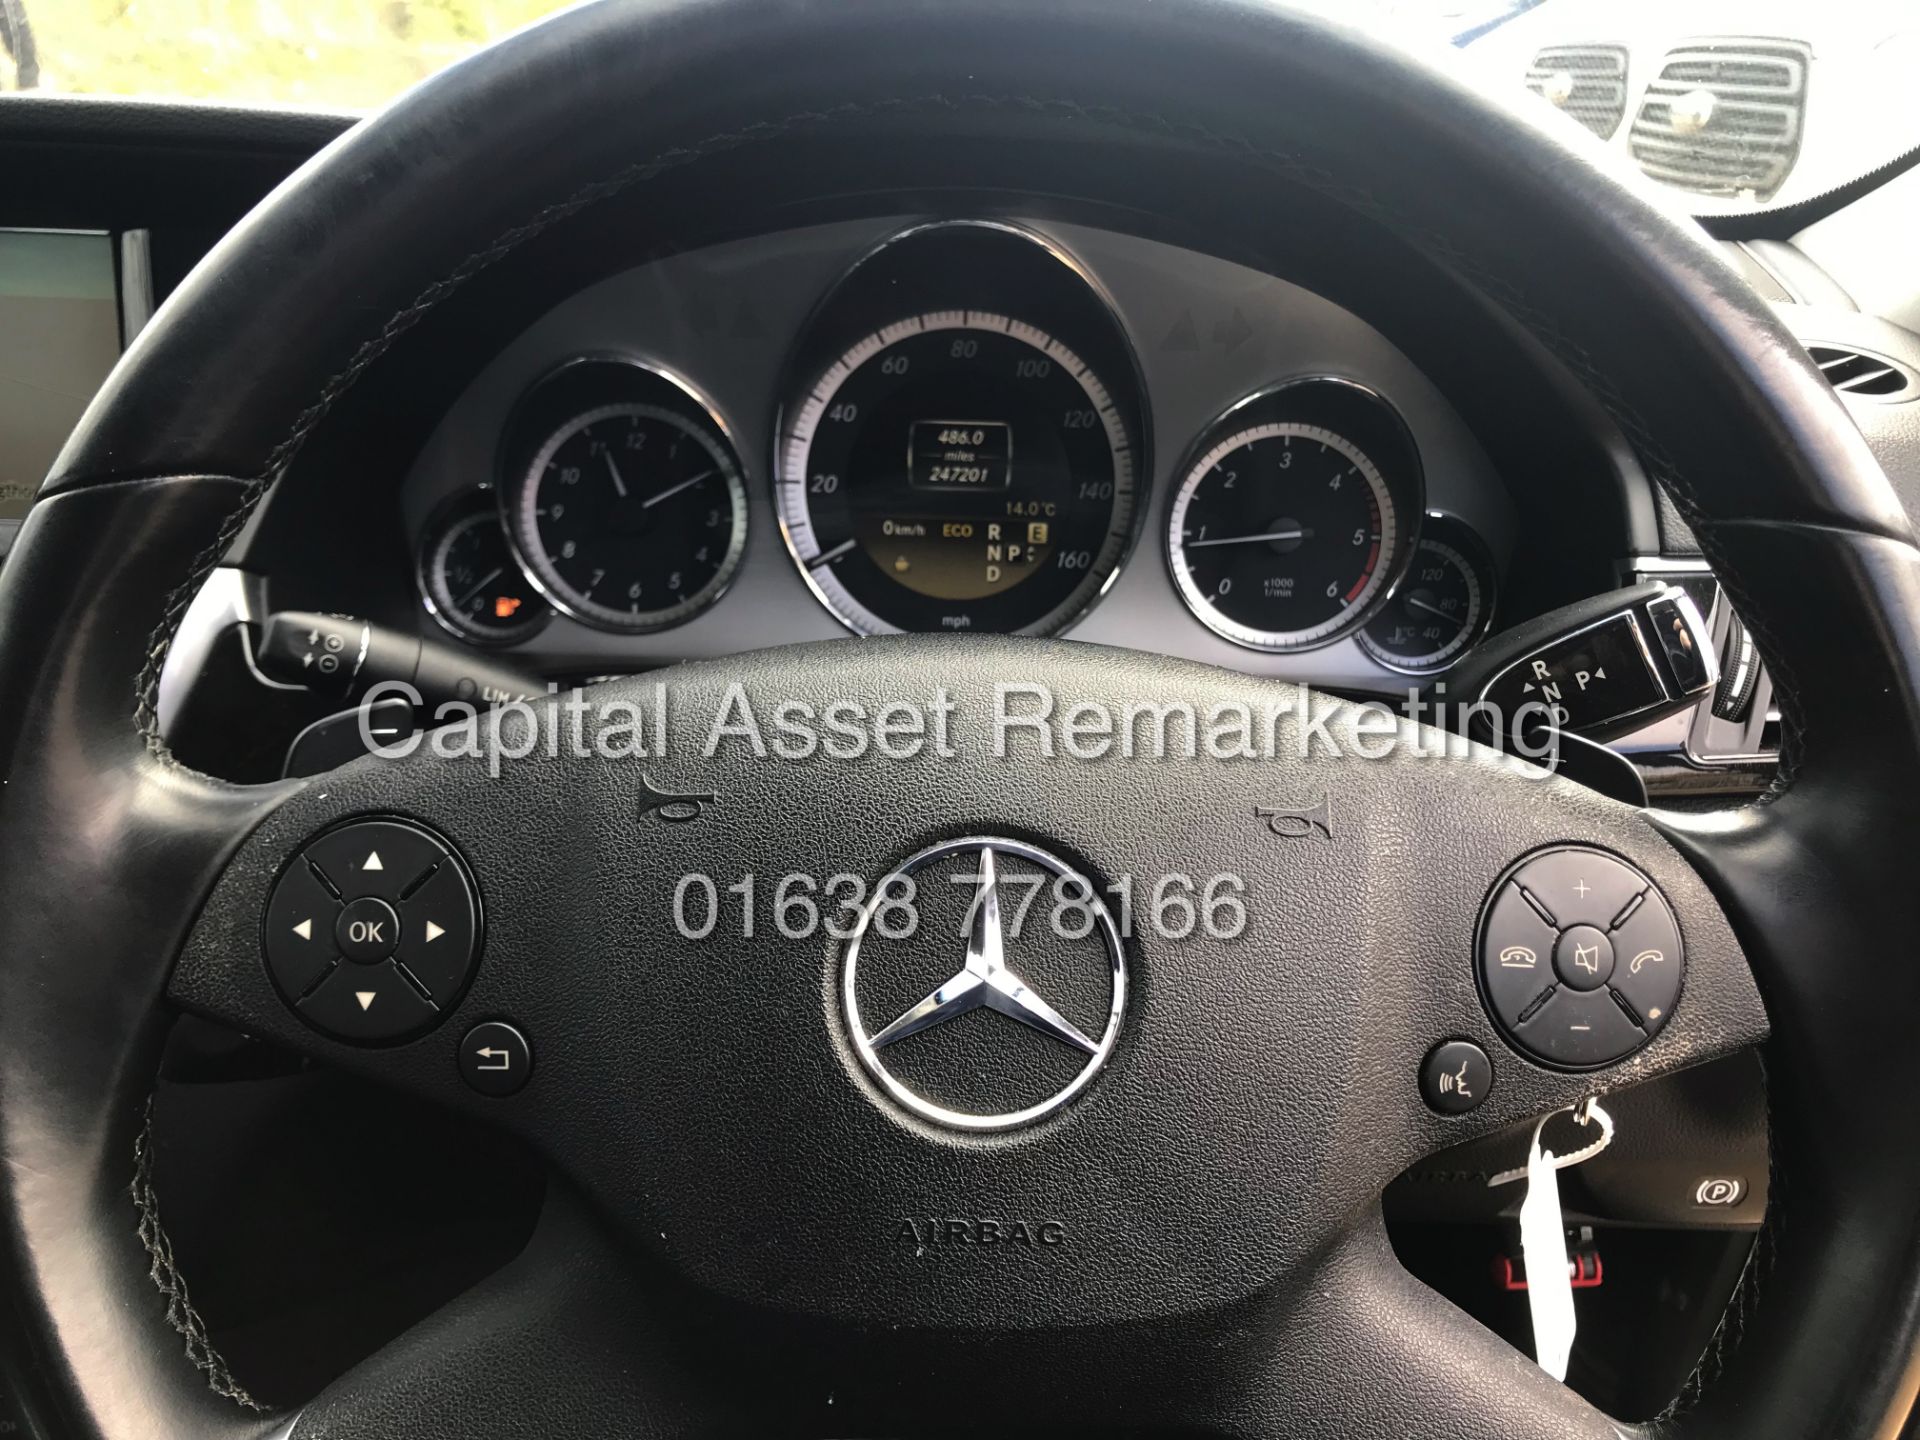 MERCEDES E220d 7G AUTO "EXECUTIVE - SPECIAL EQUIPMENT" SAT NAV - LEATHER - CLIMATE - CRUISE - Image 13 of 20